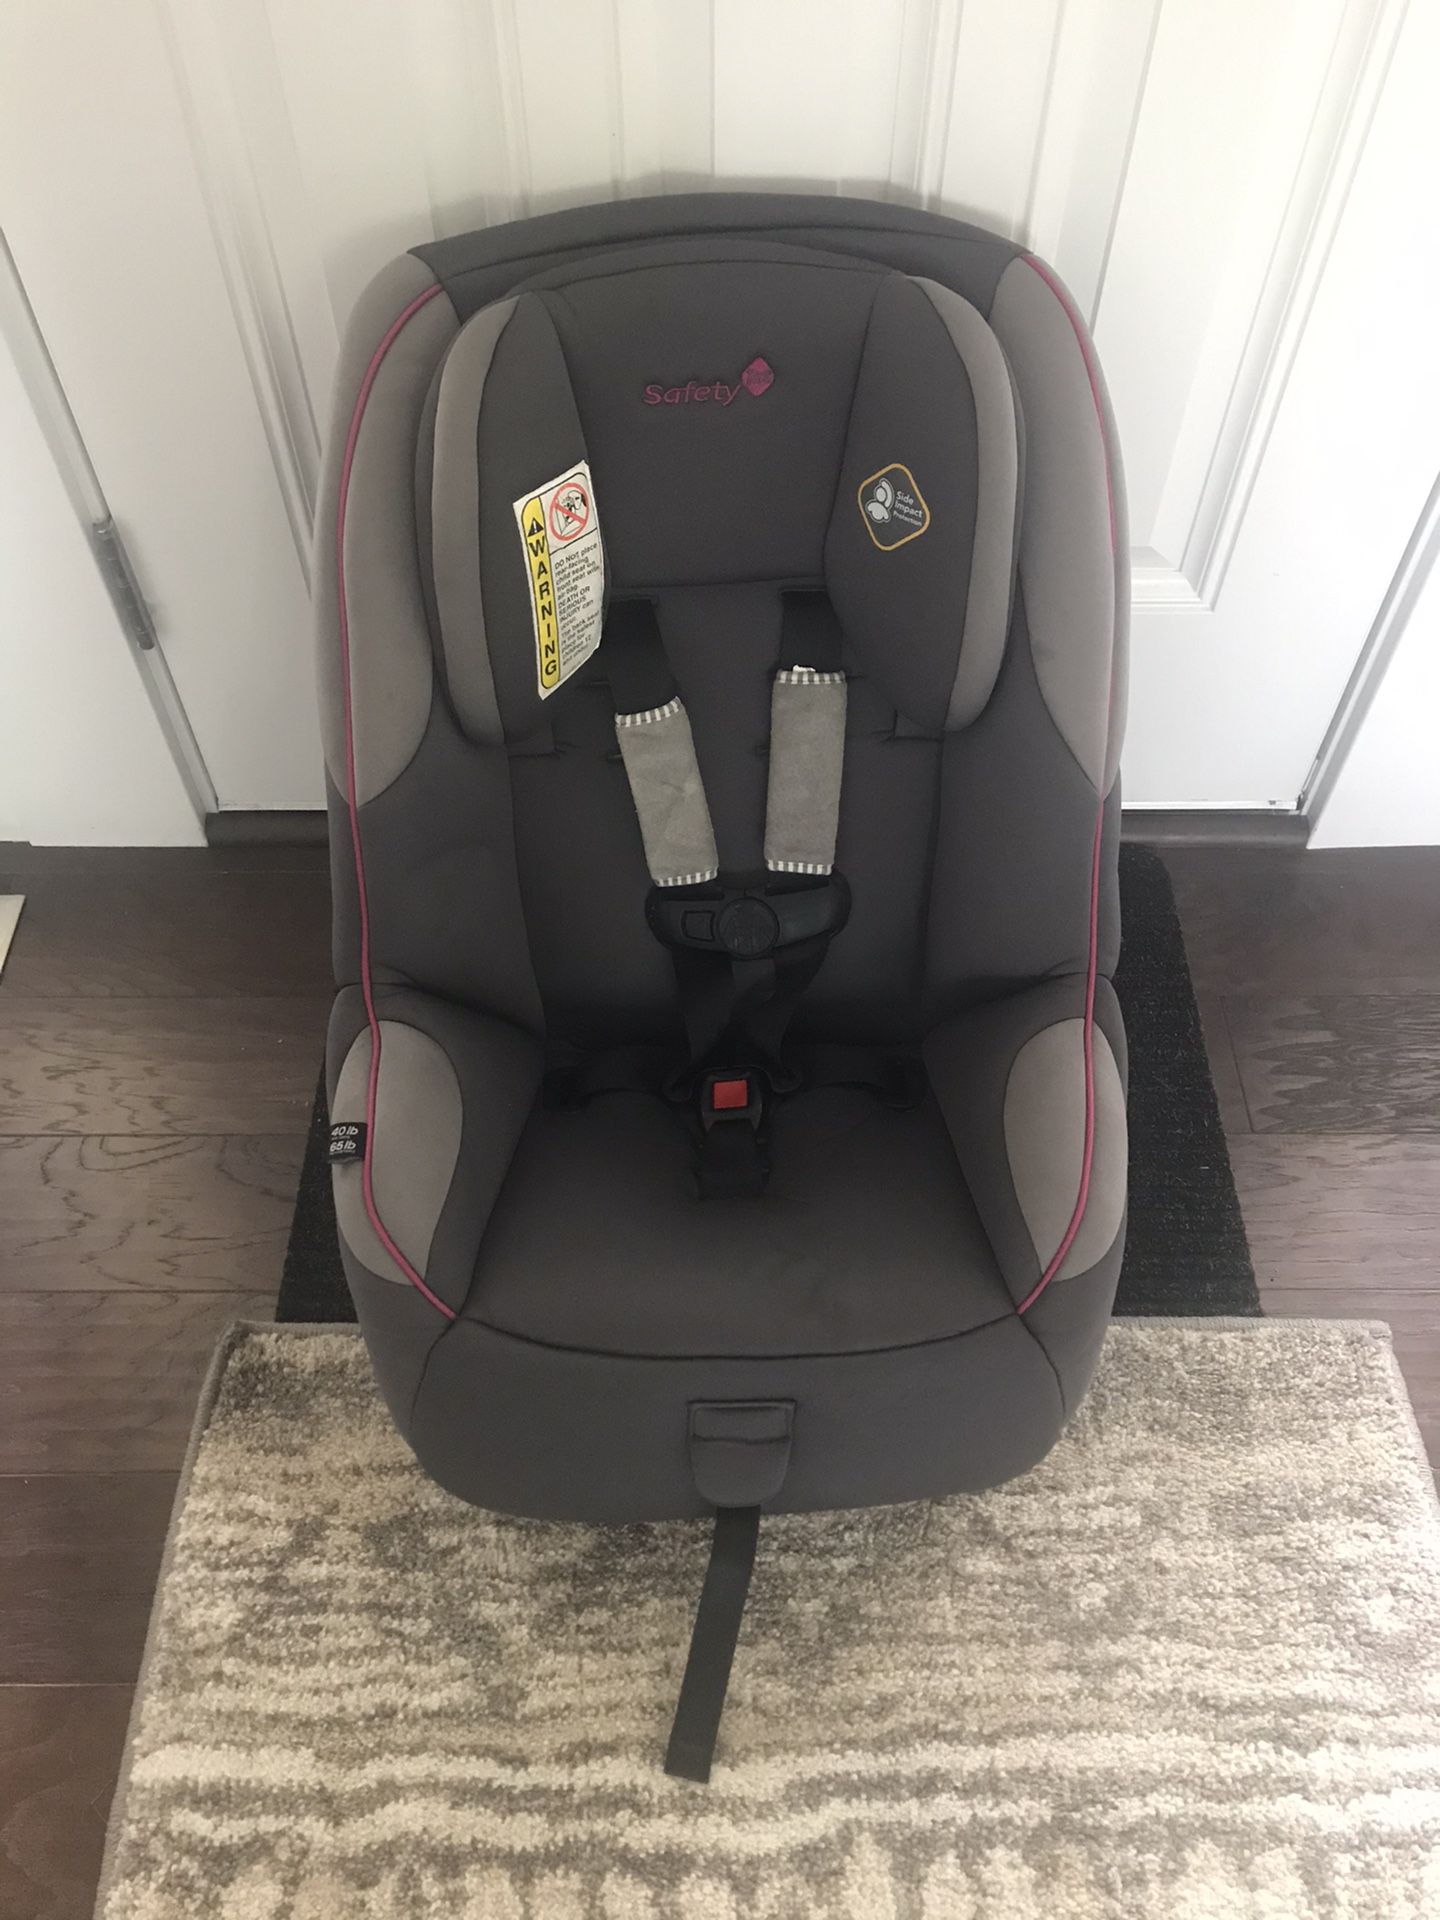 Safety first car seat